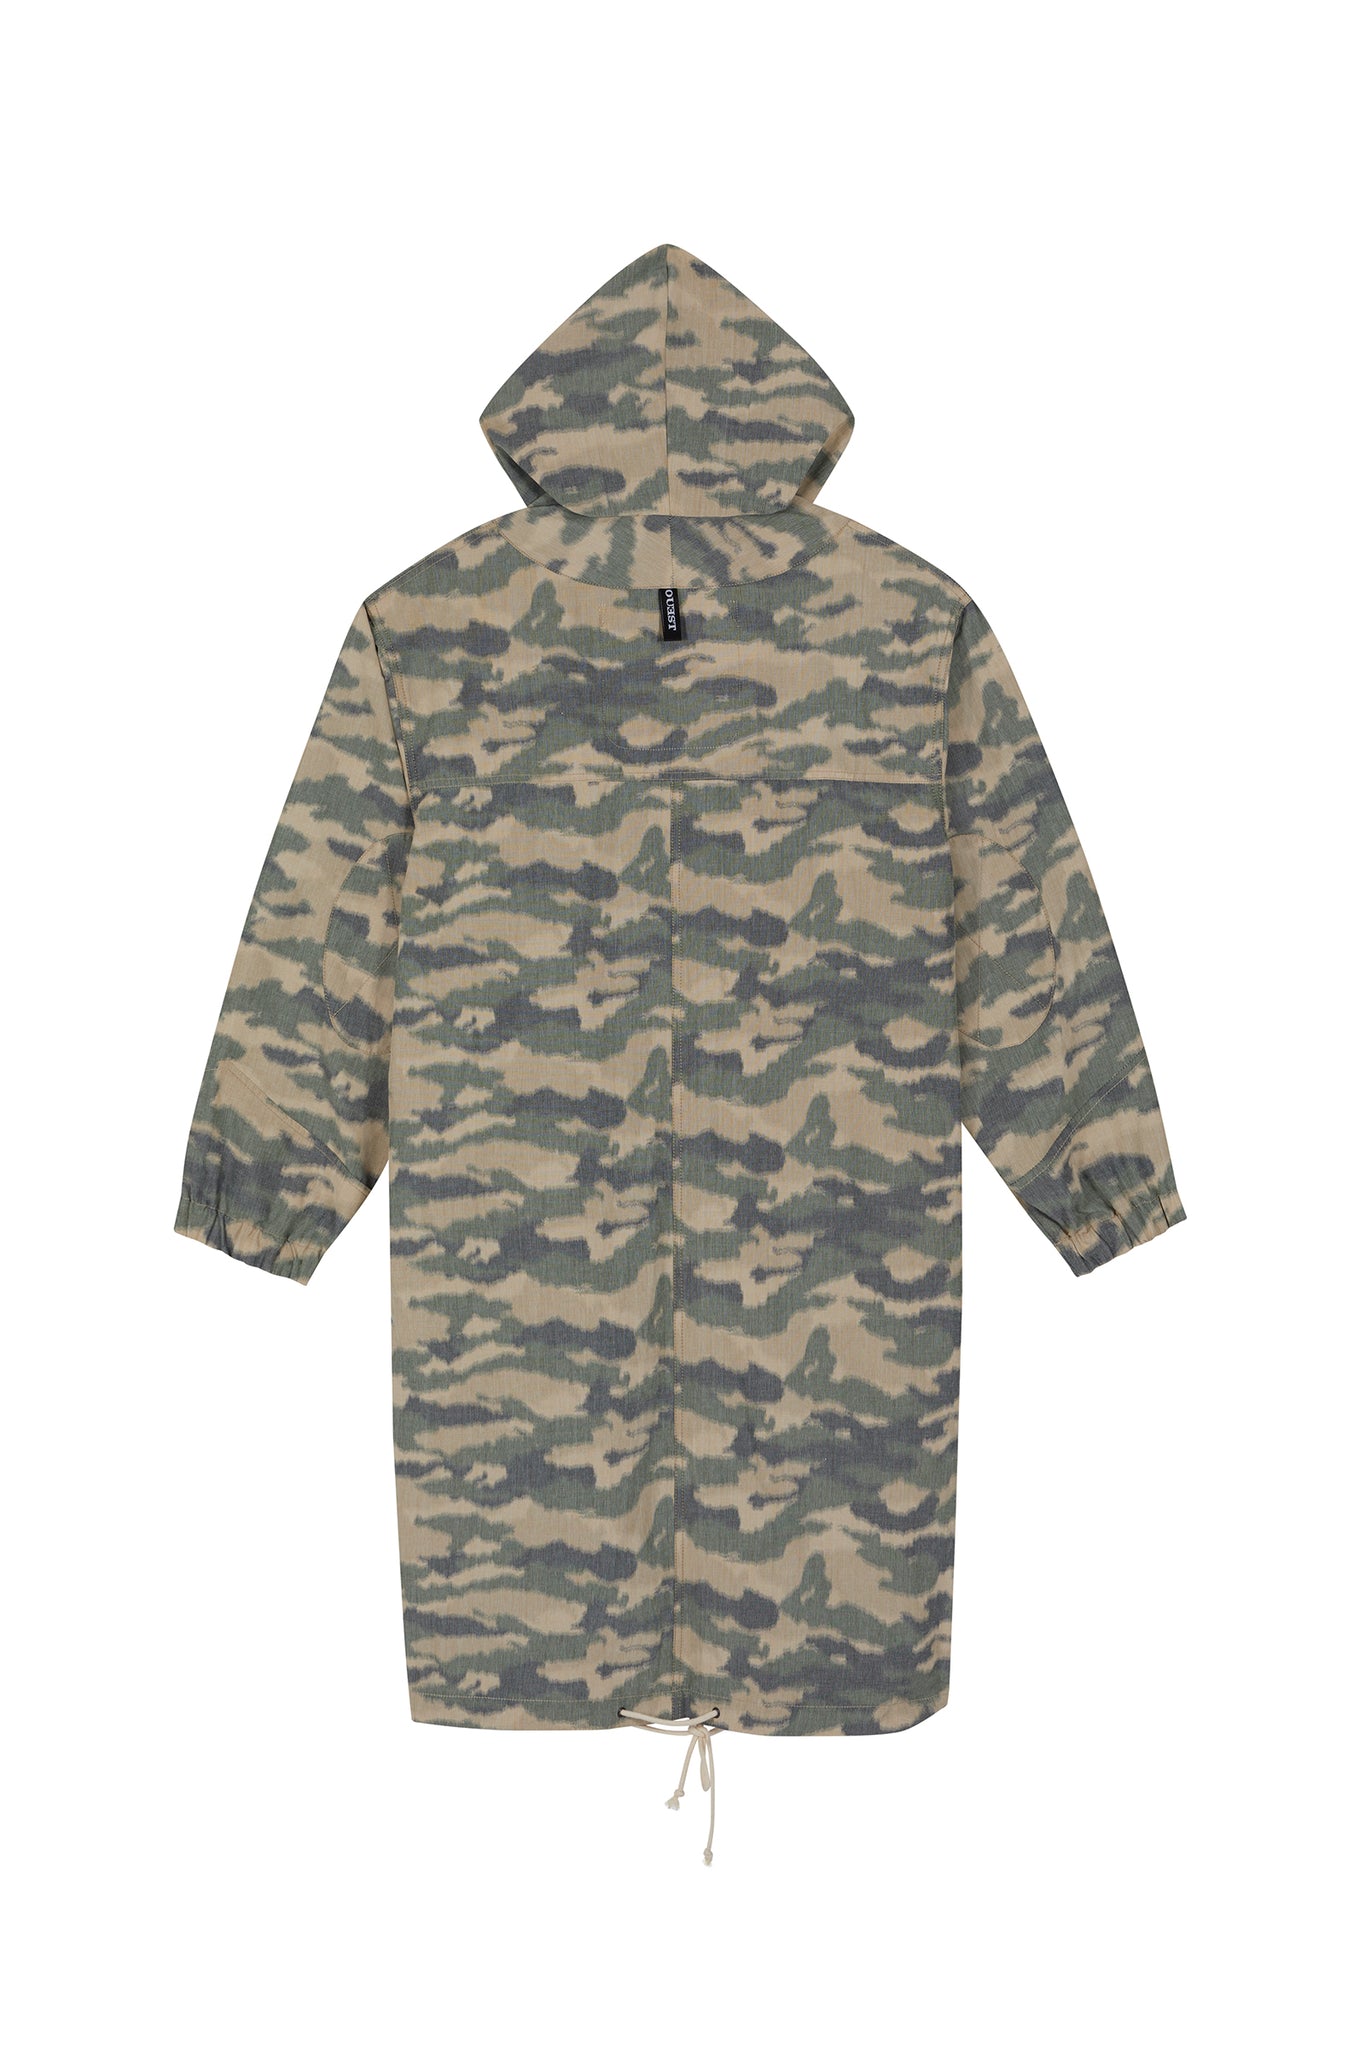 THE MOUNTAIN PARKA IN CAMOUFLAGE COTTON